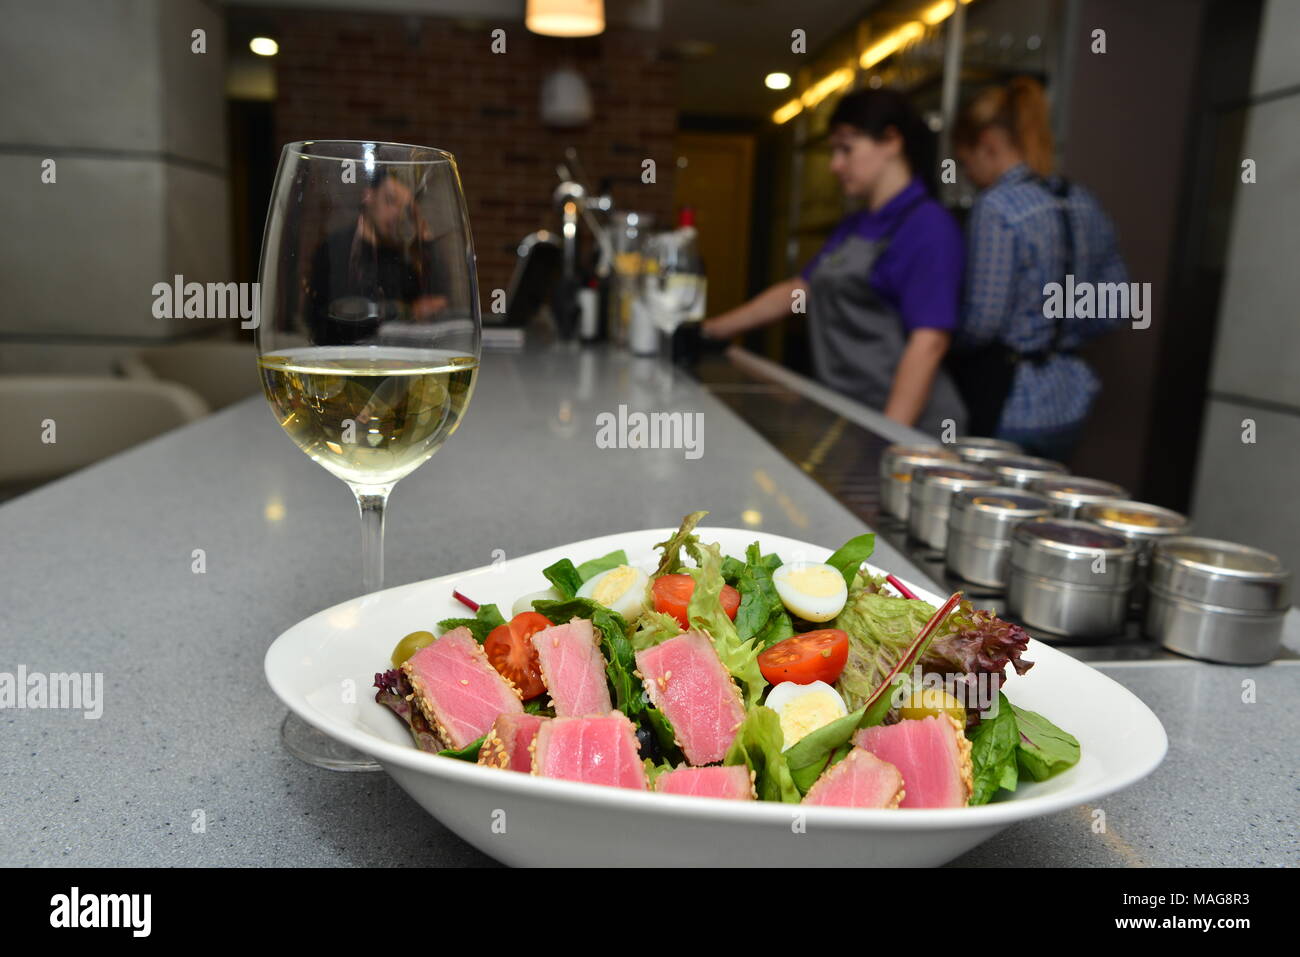 A plate with tuna fish, salad and a glass of white wine Stock Photo